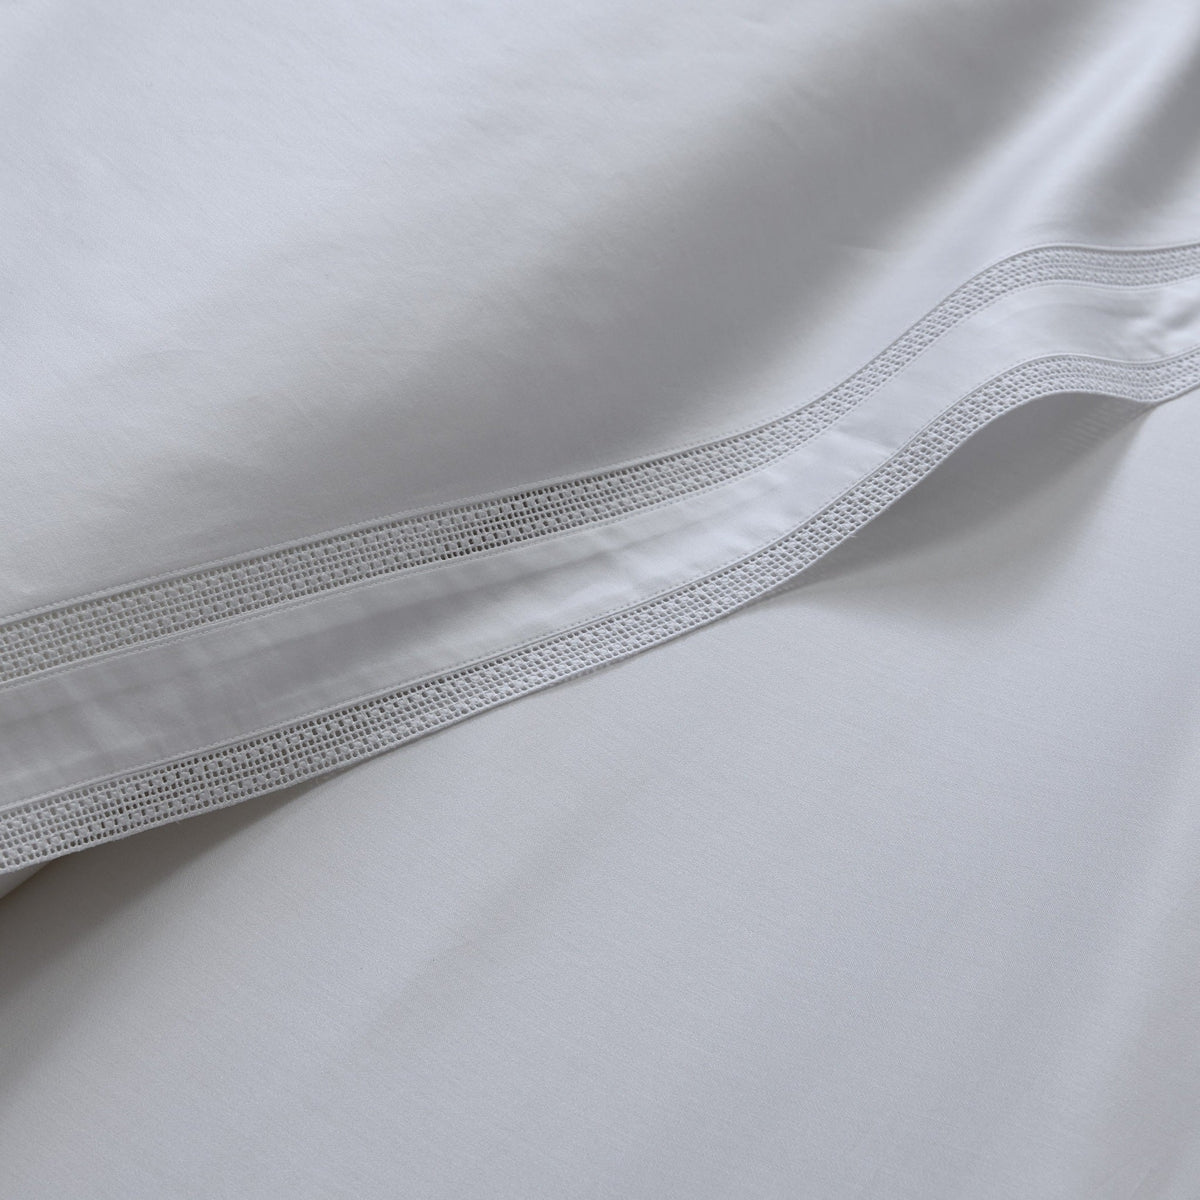 Detail View of Flat Sheet of Matouk Grace Bedding in Color White